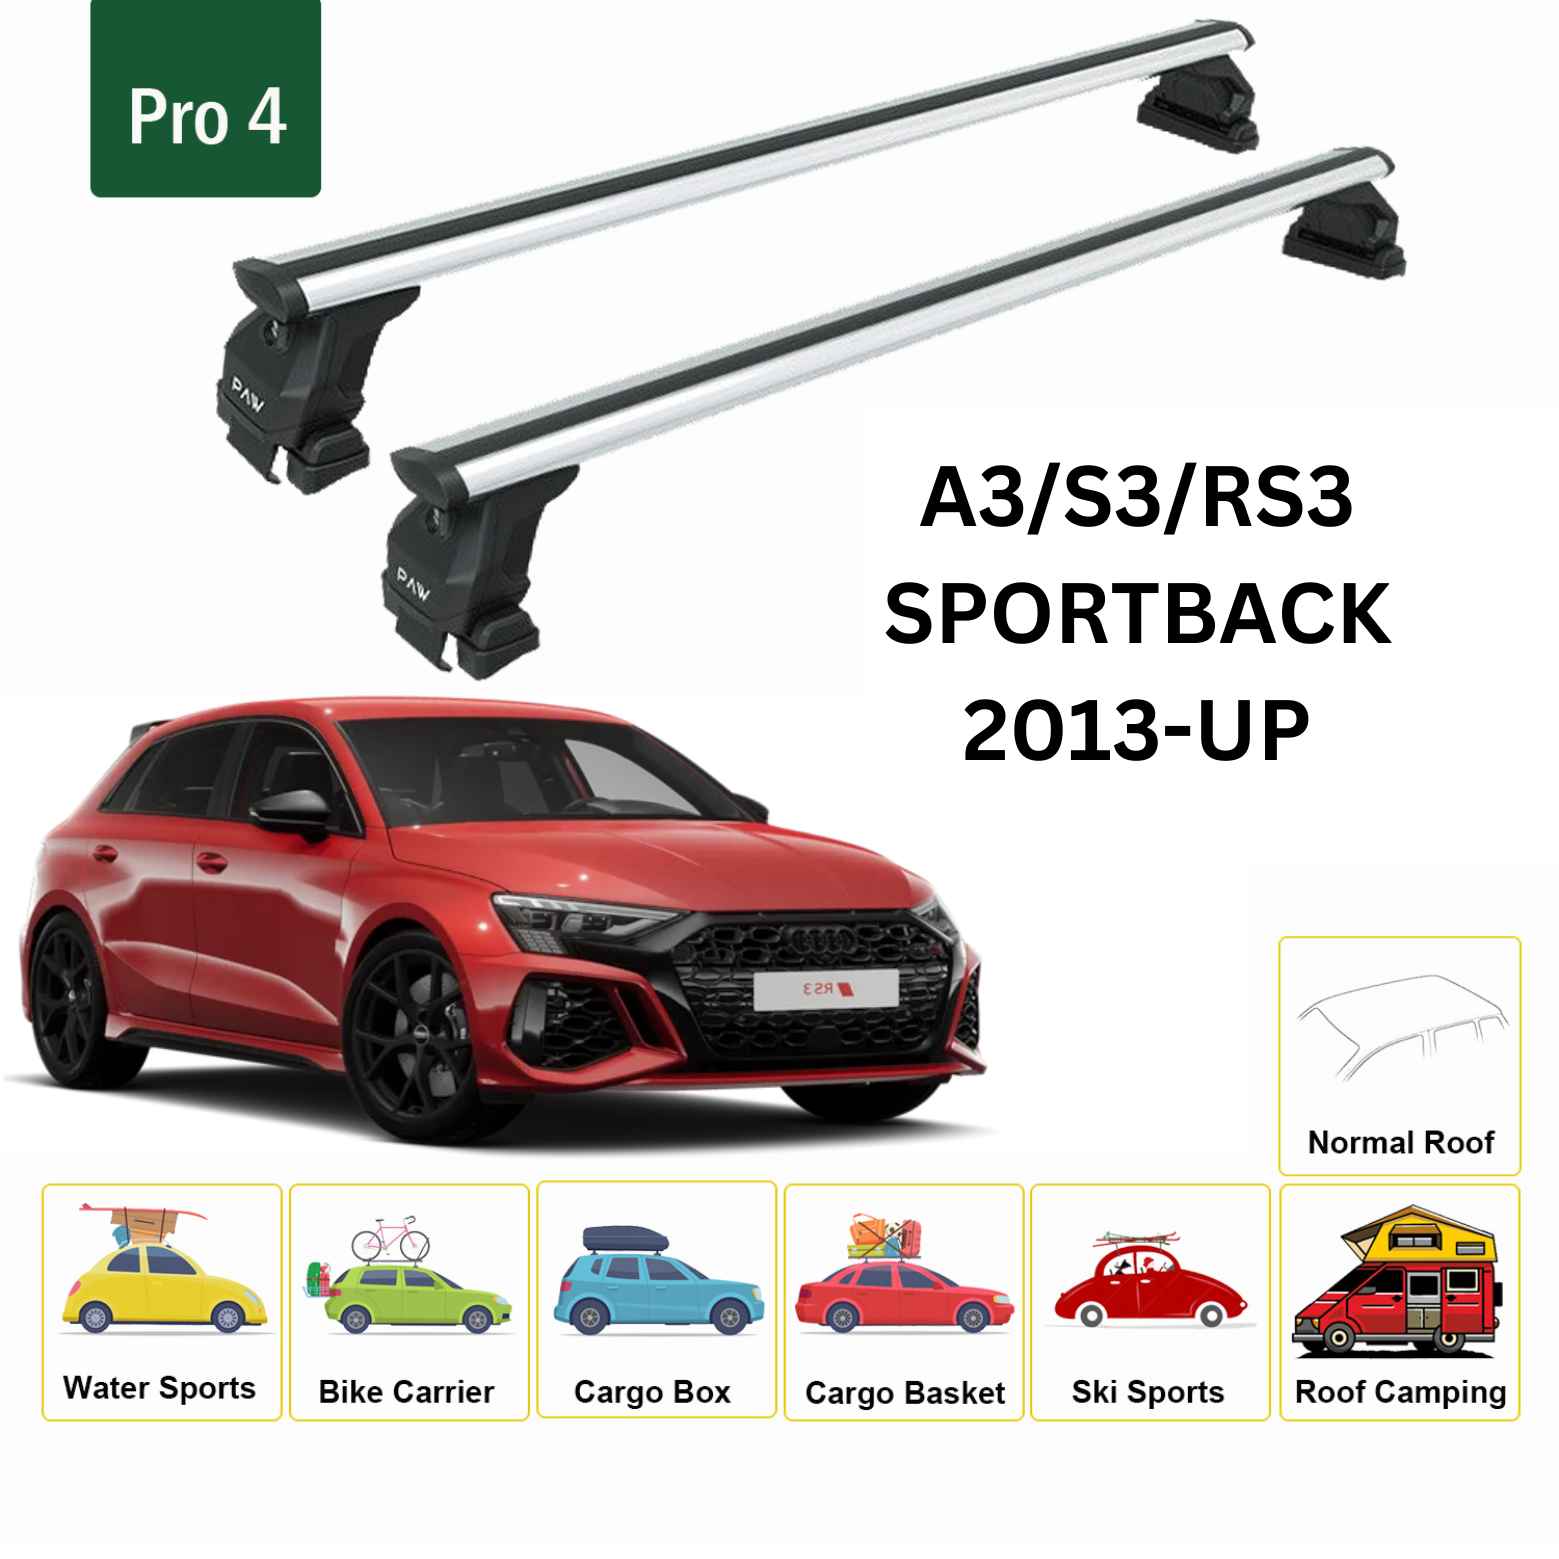 For Audi A3/S3/RS3 Sportback 2013-Up Roof Rack Cross Bars Normal Roof Alu Silver - 0